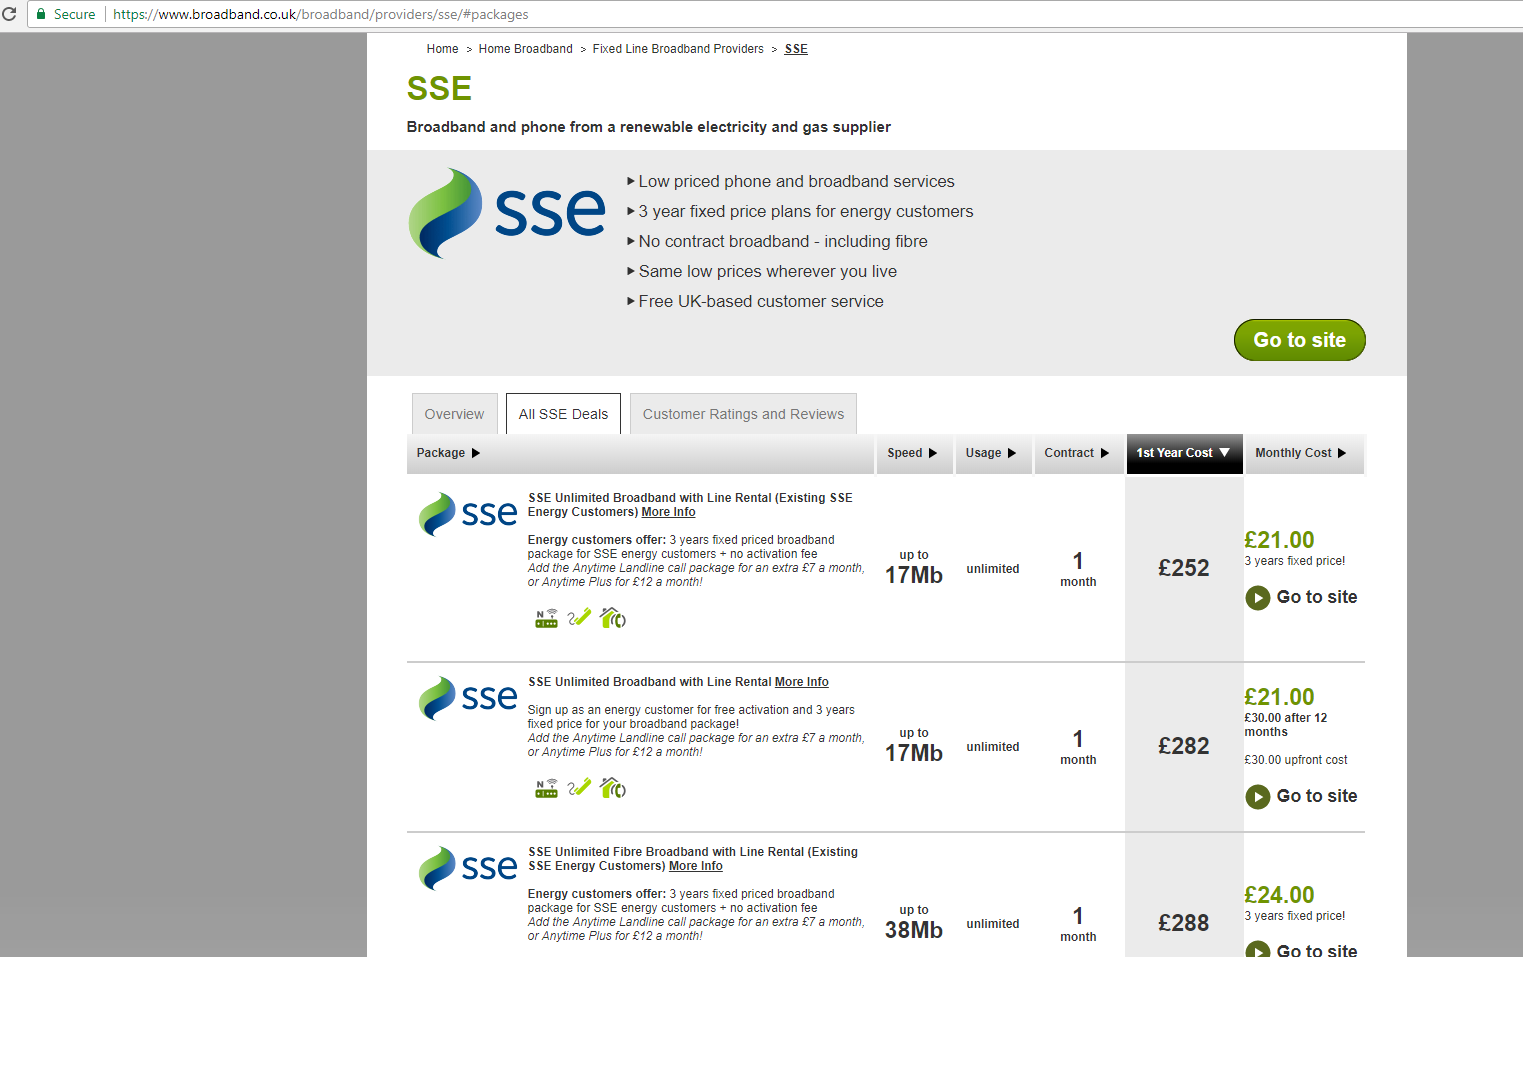 Here is the affiliation proof with SSE